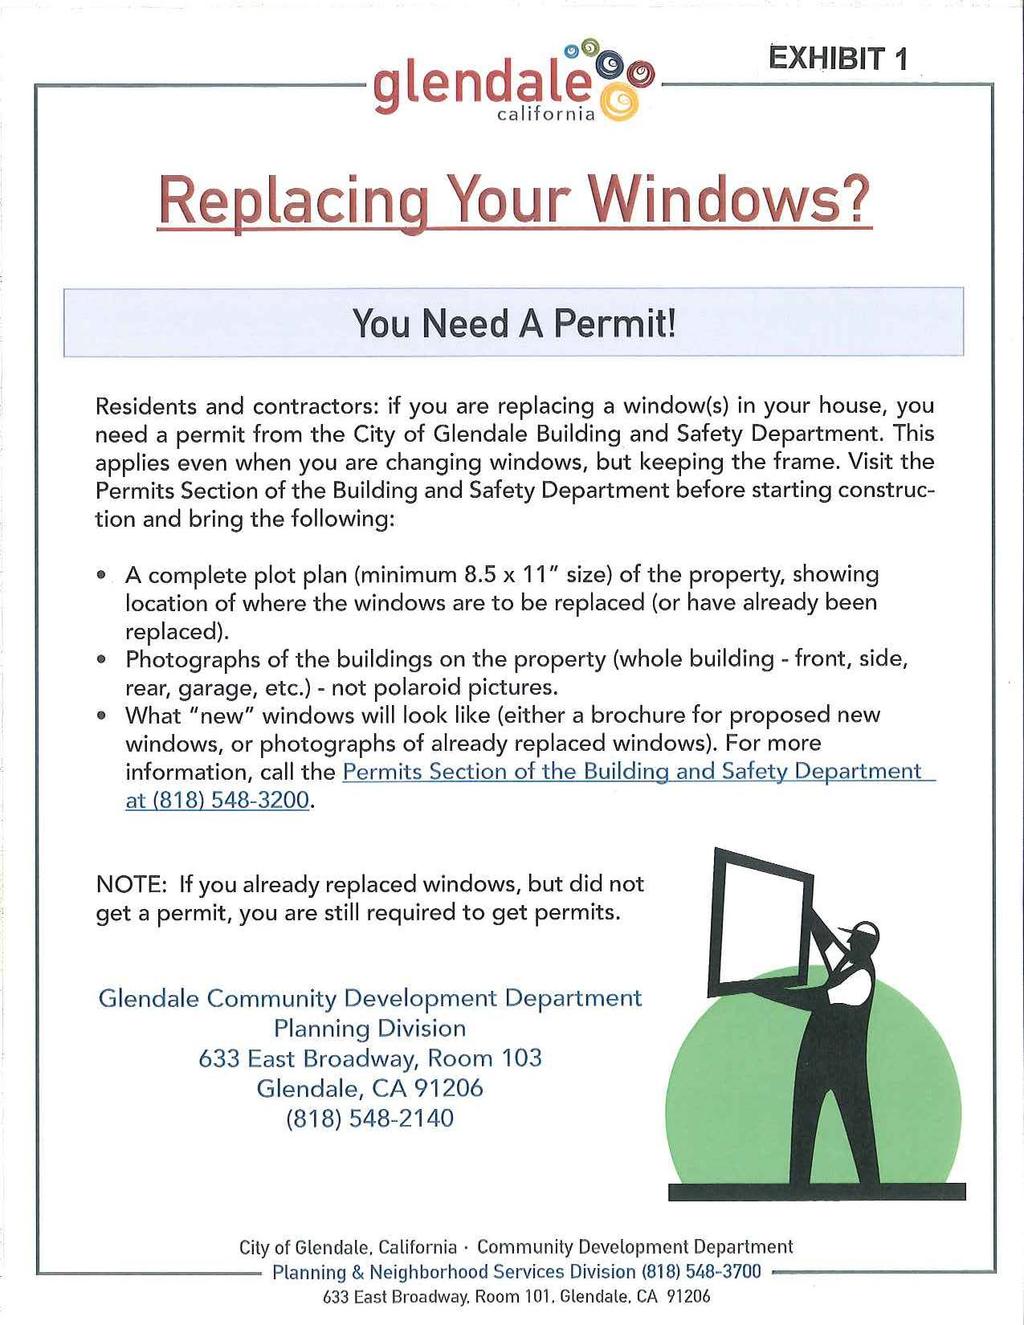 ------------ glen~~!~~@~ E_ x_h_ib_it_1 Replacing Your Windows? You Need A Permit!